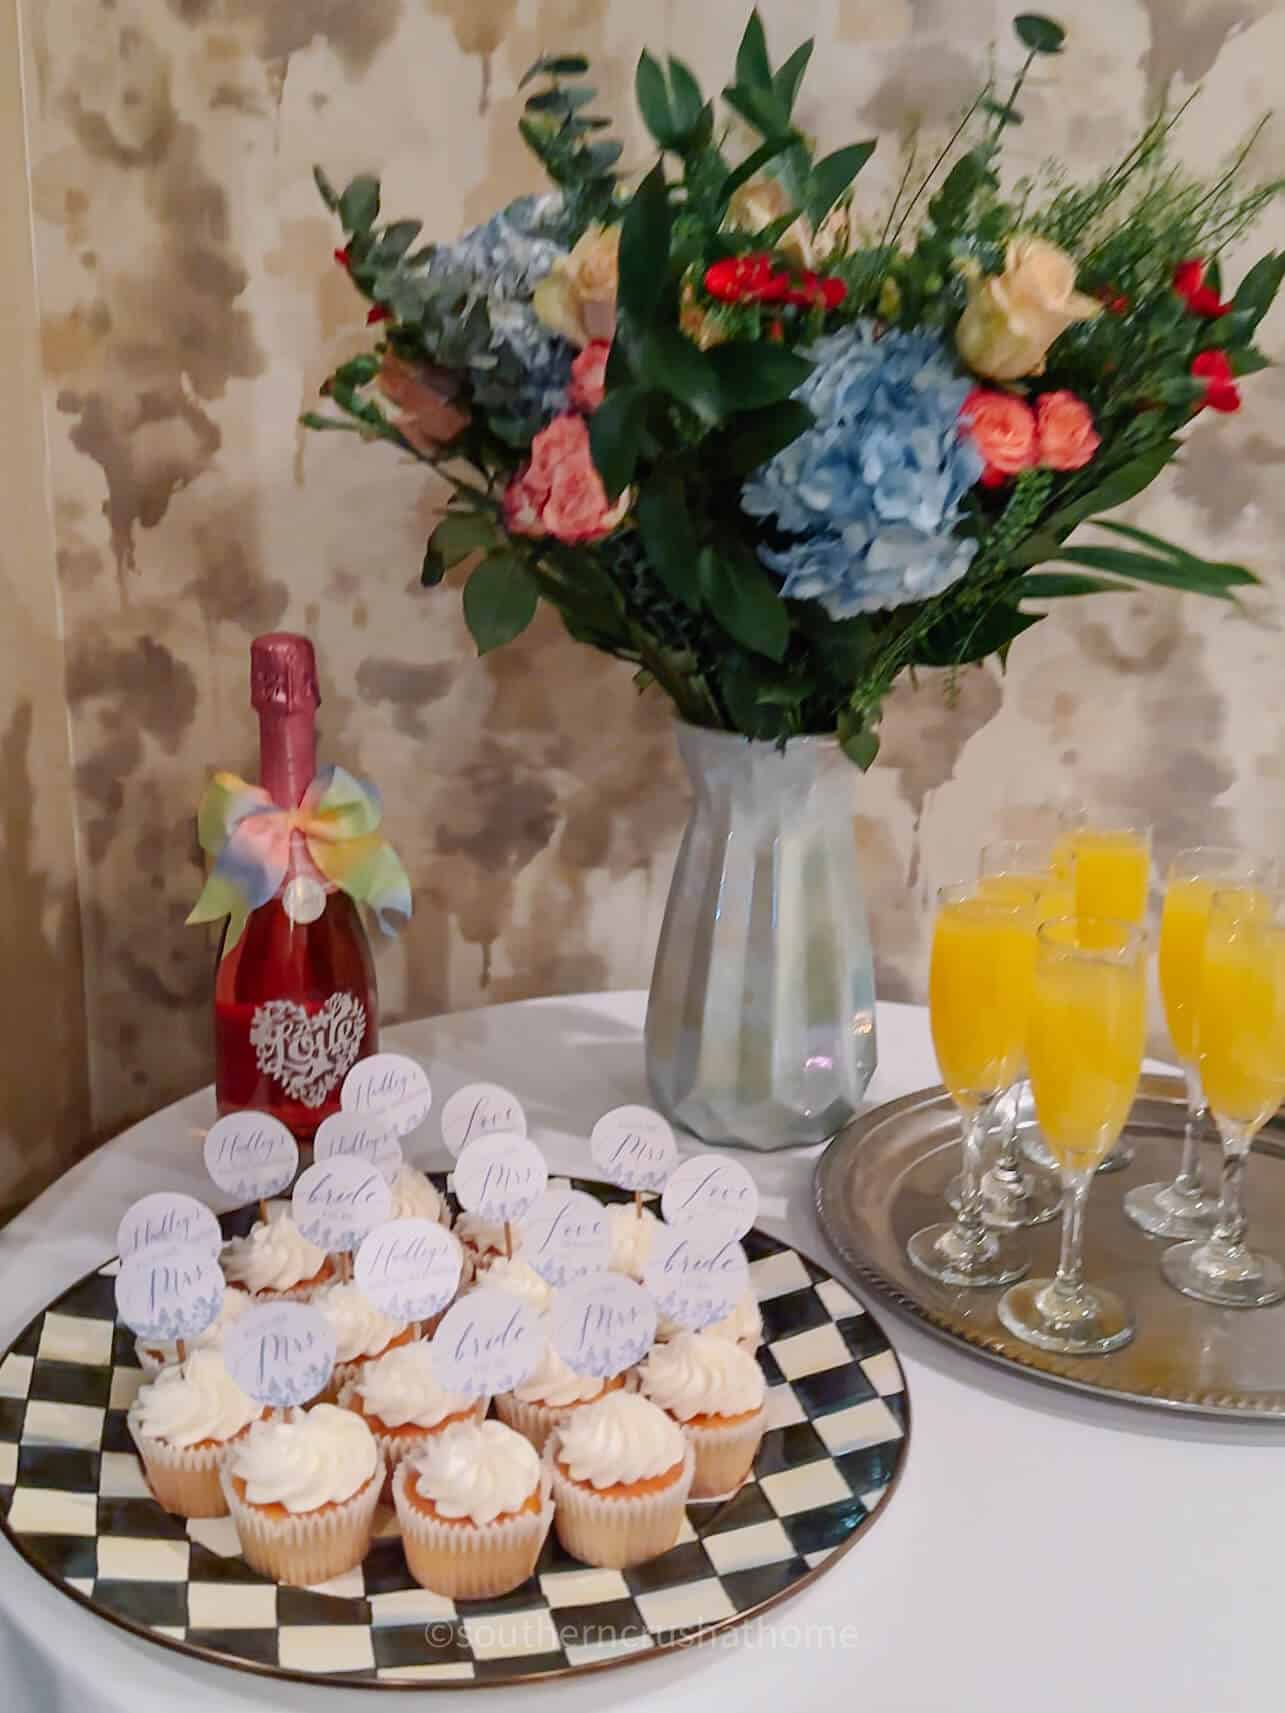 cupcakes displayed at shower on a table with flowers